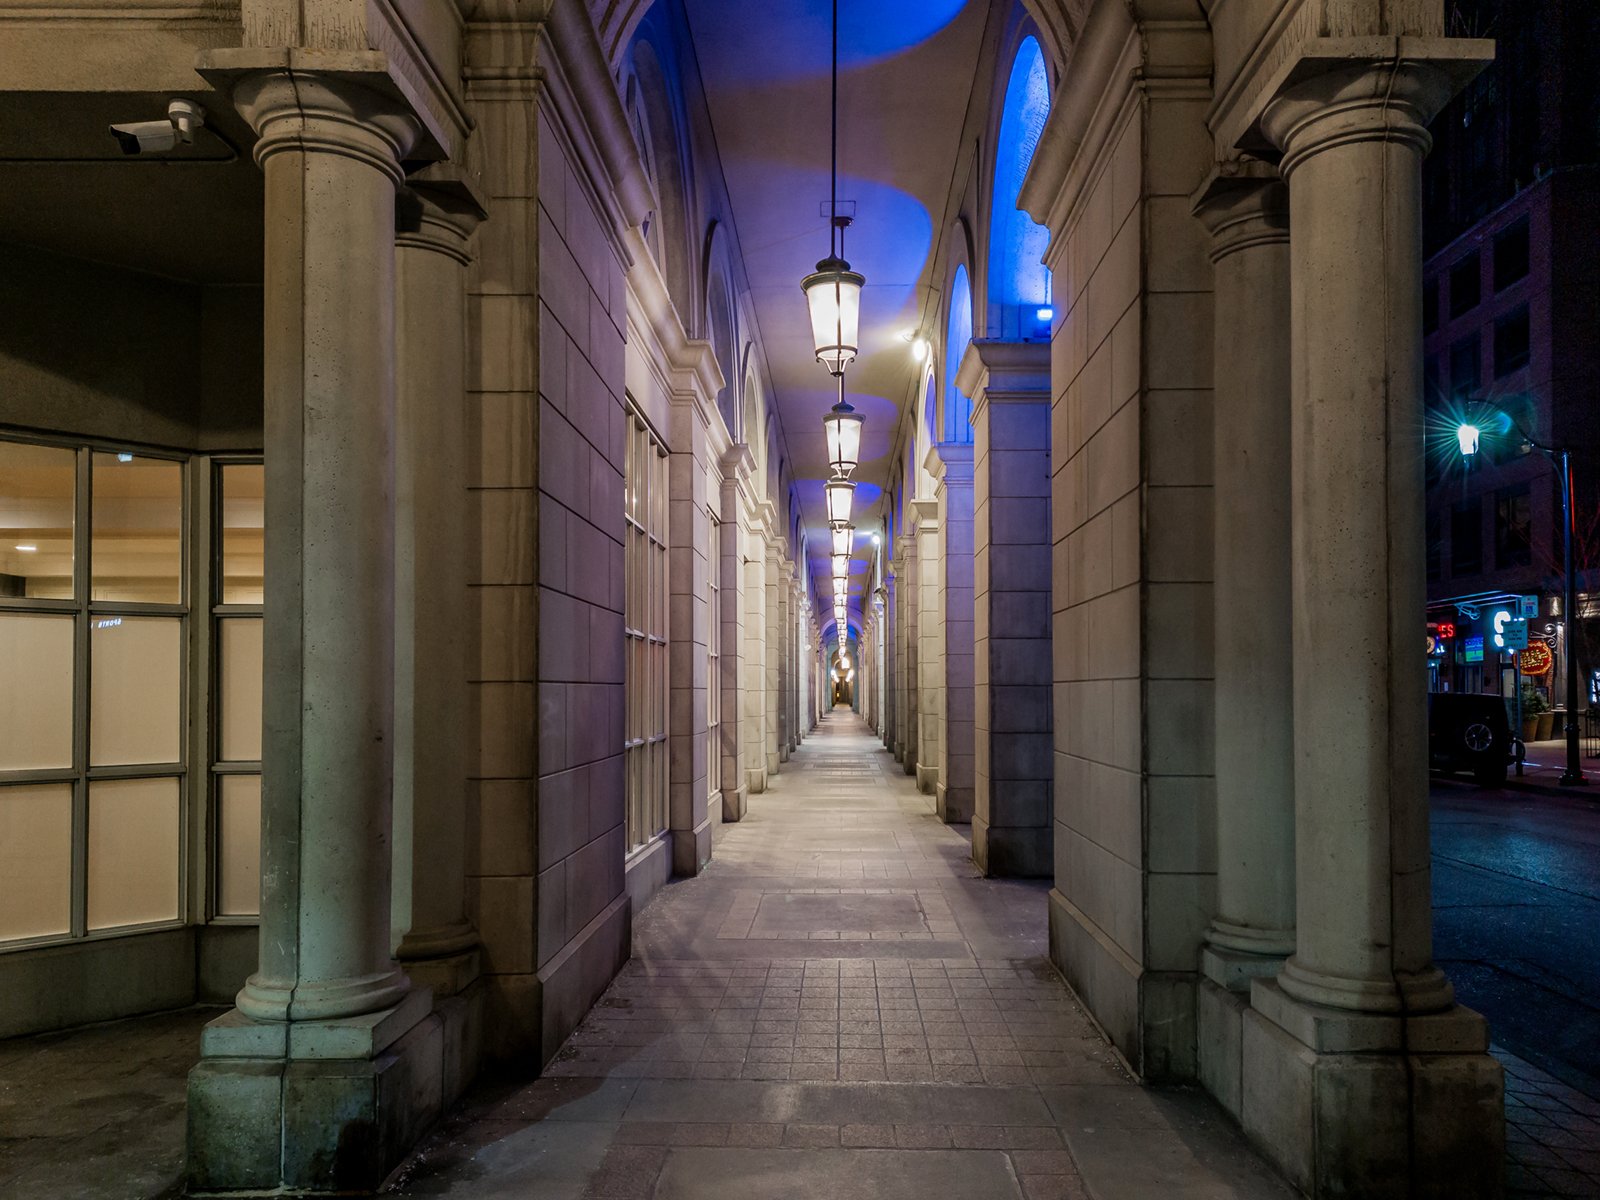 A narrow passage between classical stone arches, illuminated by hanging lanterns at dusk, leading to a vivid blue-lit archway in the distance. the path is deserted and creates a serene urban scene.